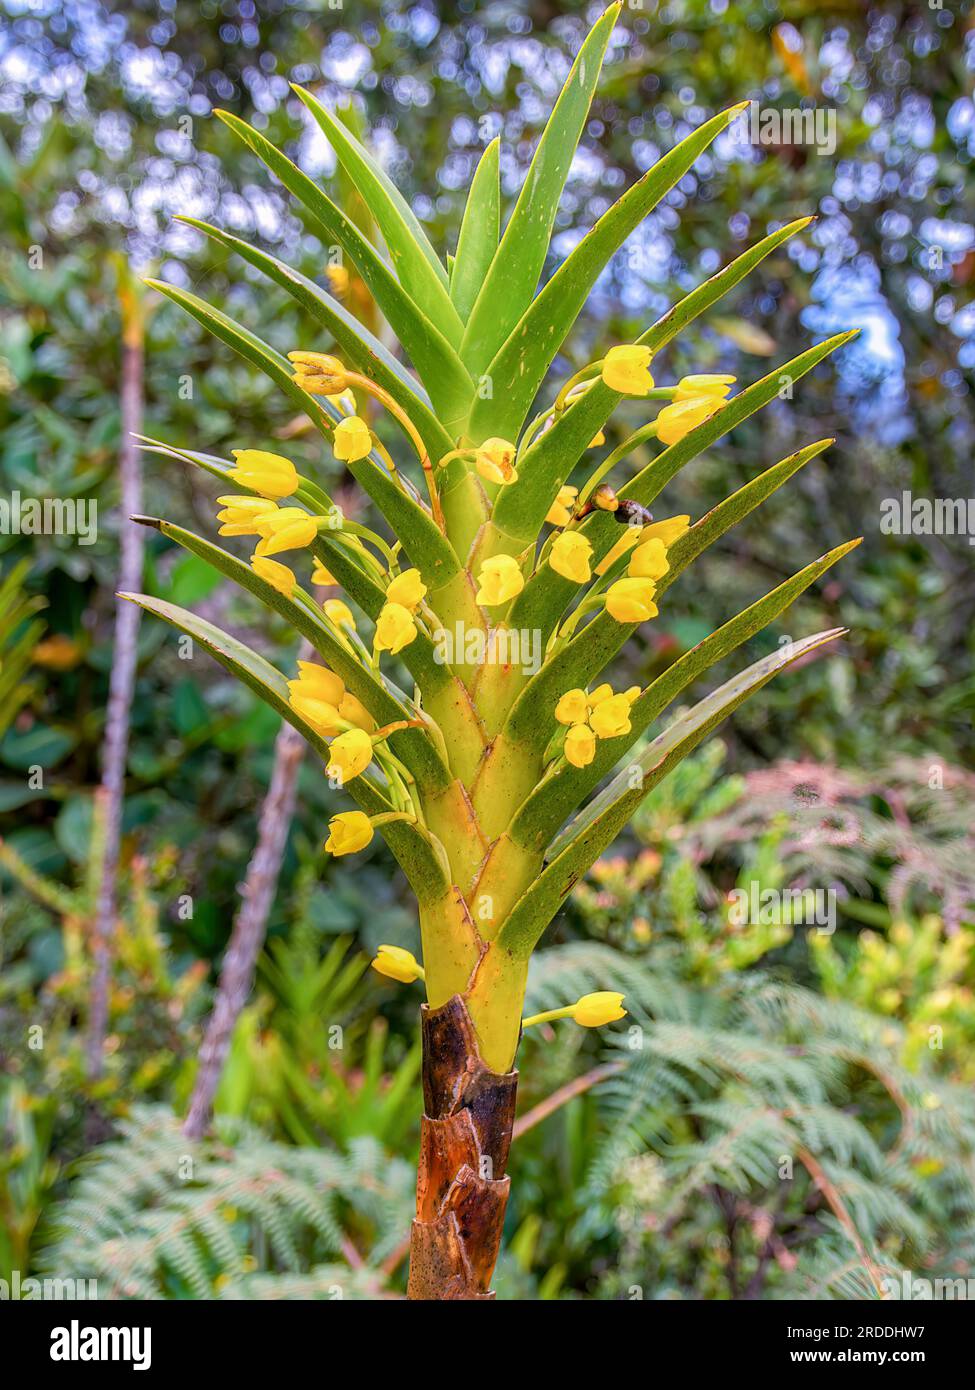 An exotic maxillaria aurea plant in bloom, captured at the highlands of the eastern Andean mountains of Colombia near the town of Arcabuco. Stock Photo